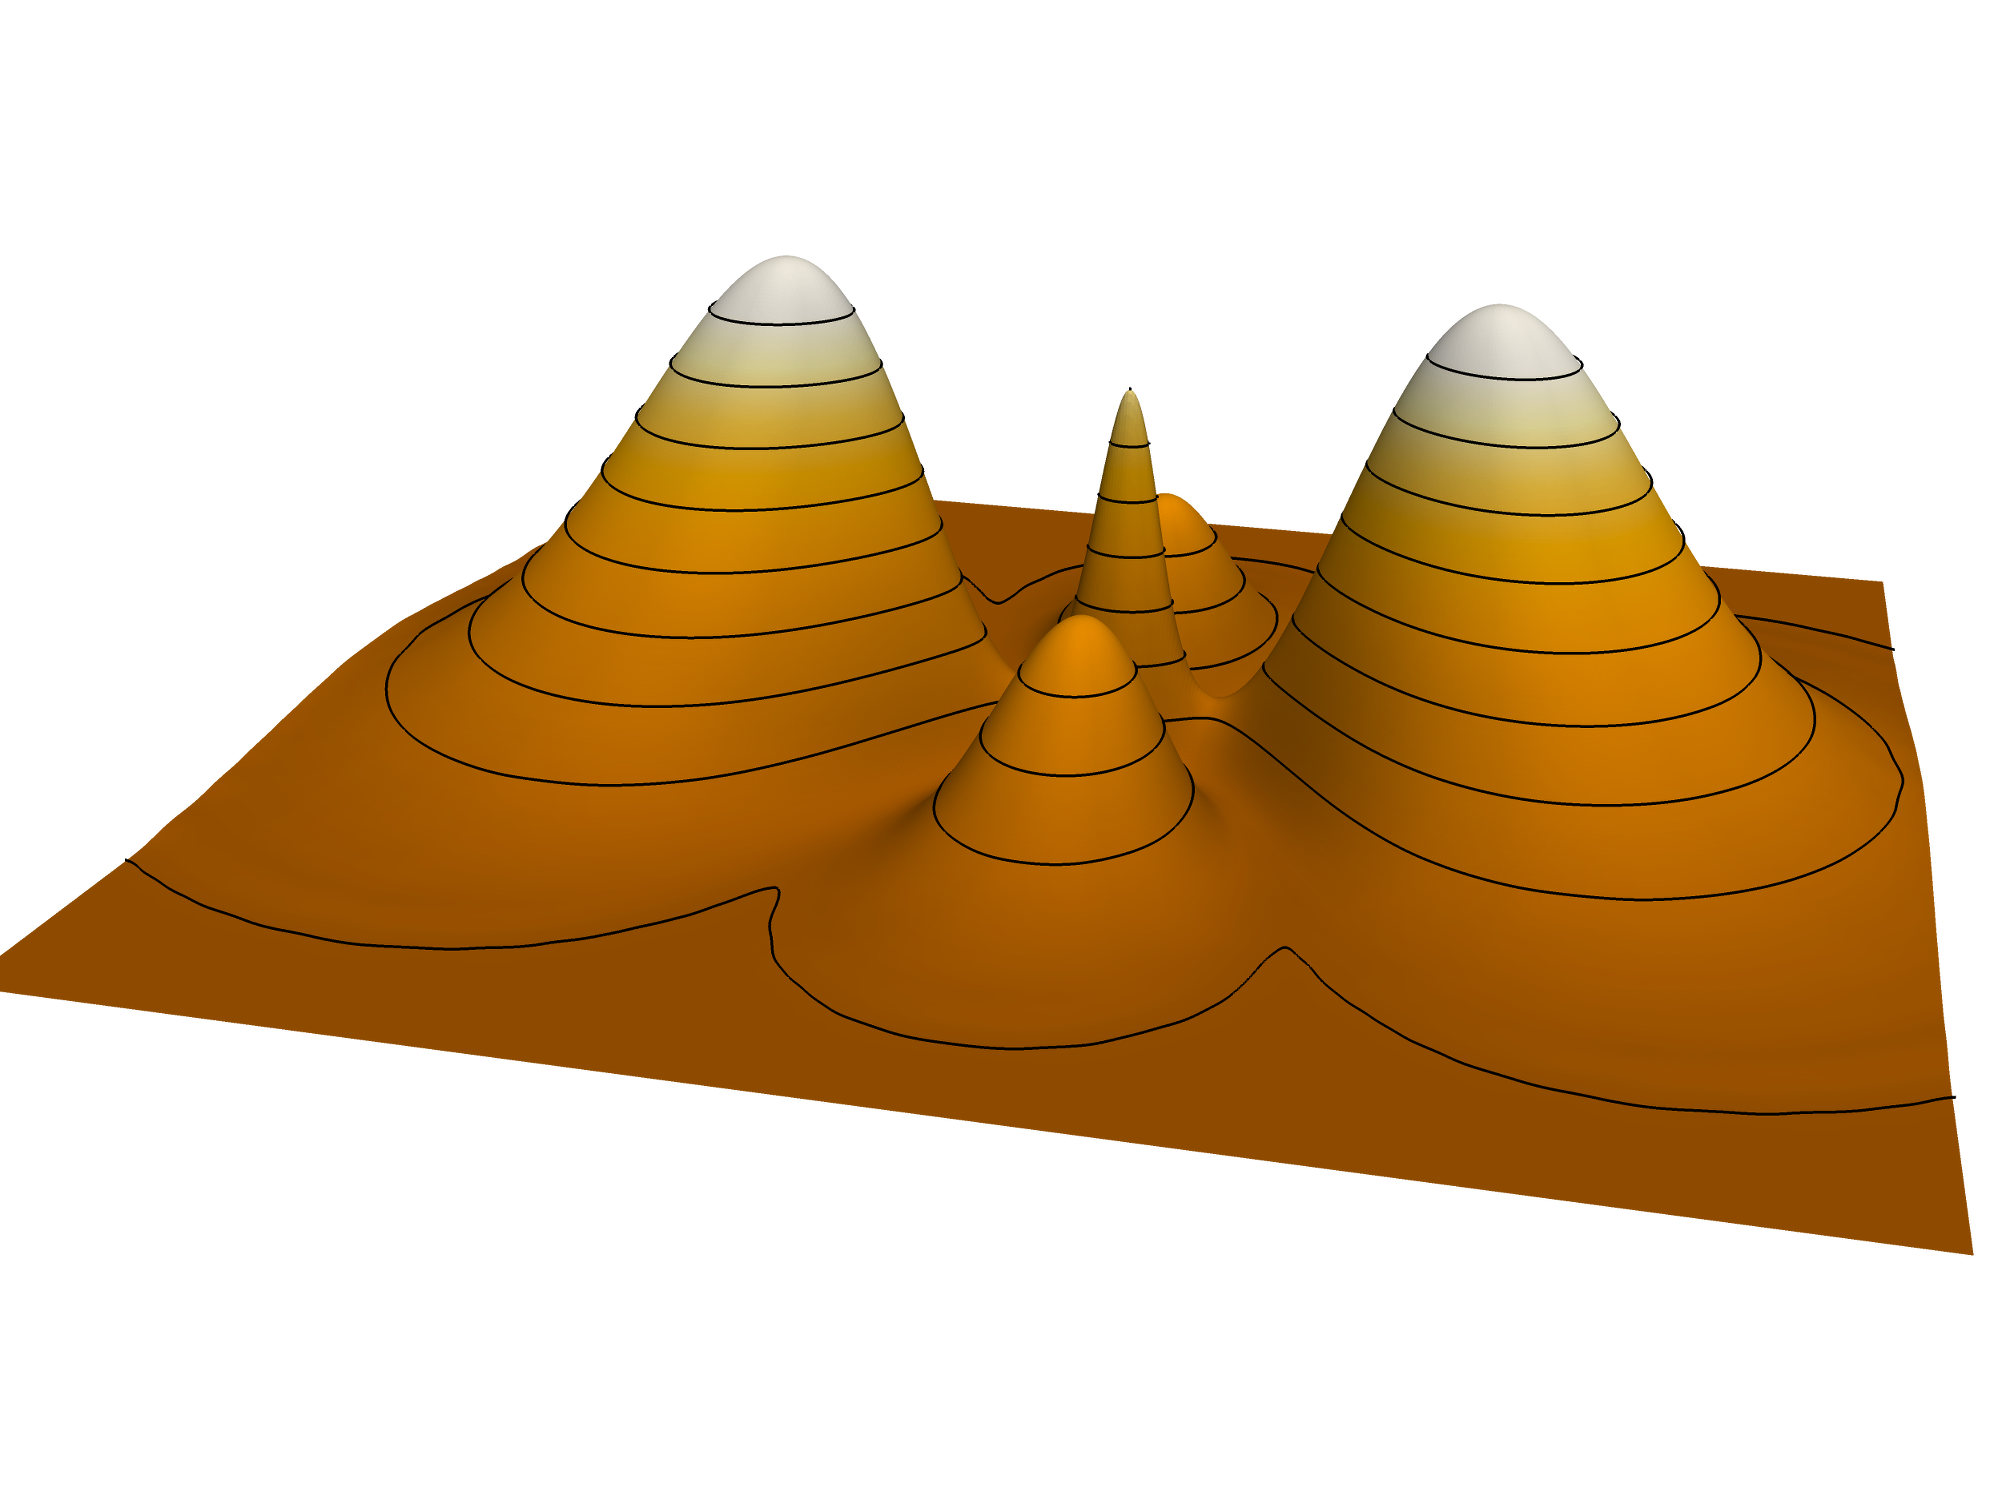 Image showing the isolines of a 2D scalar field